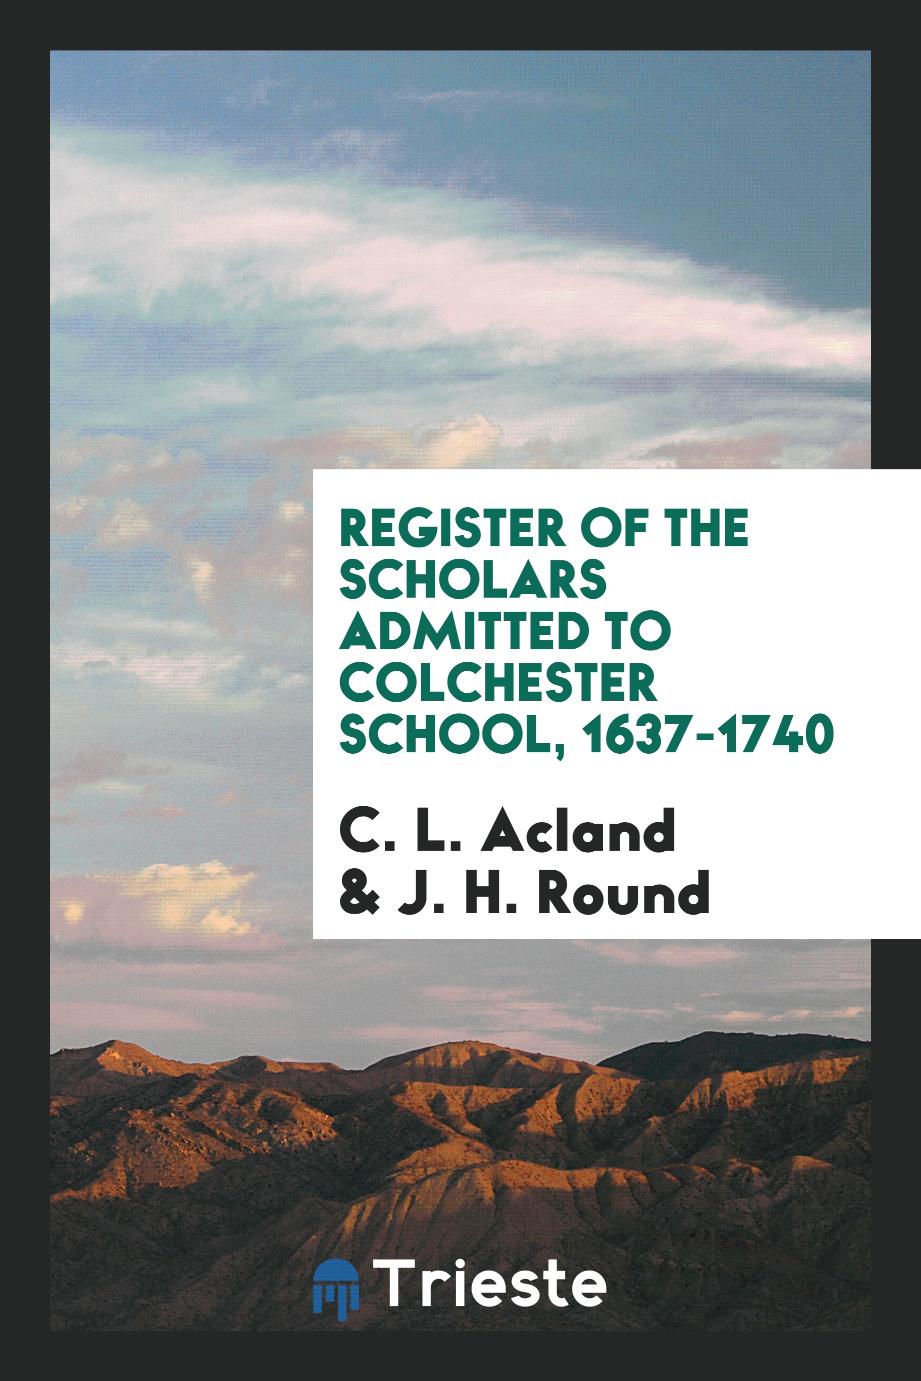 Register of the Scholars Admitted to Colchester School, 1637-1740